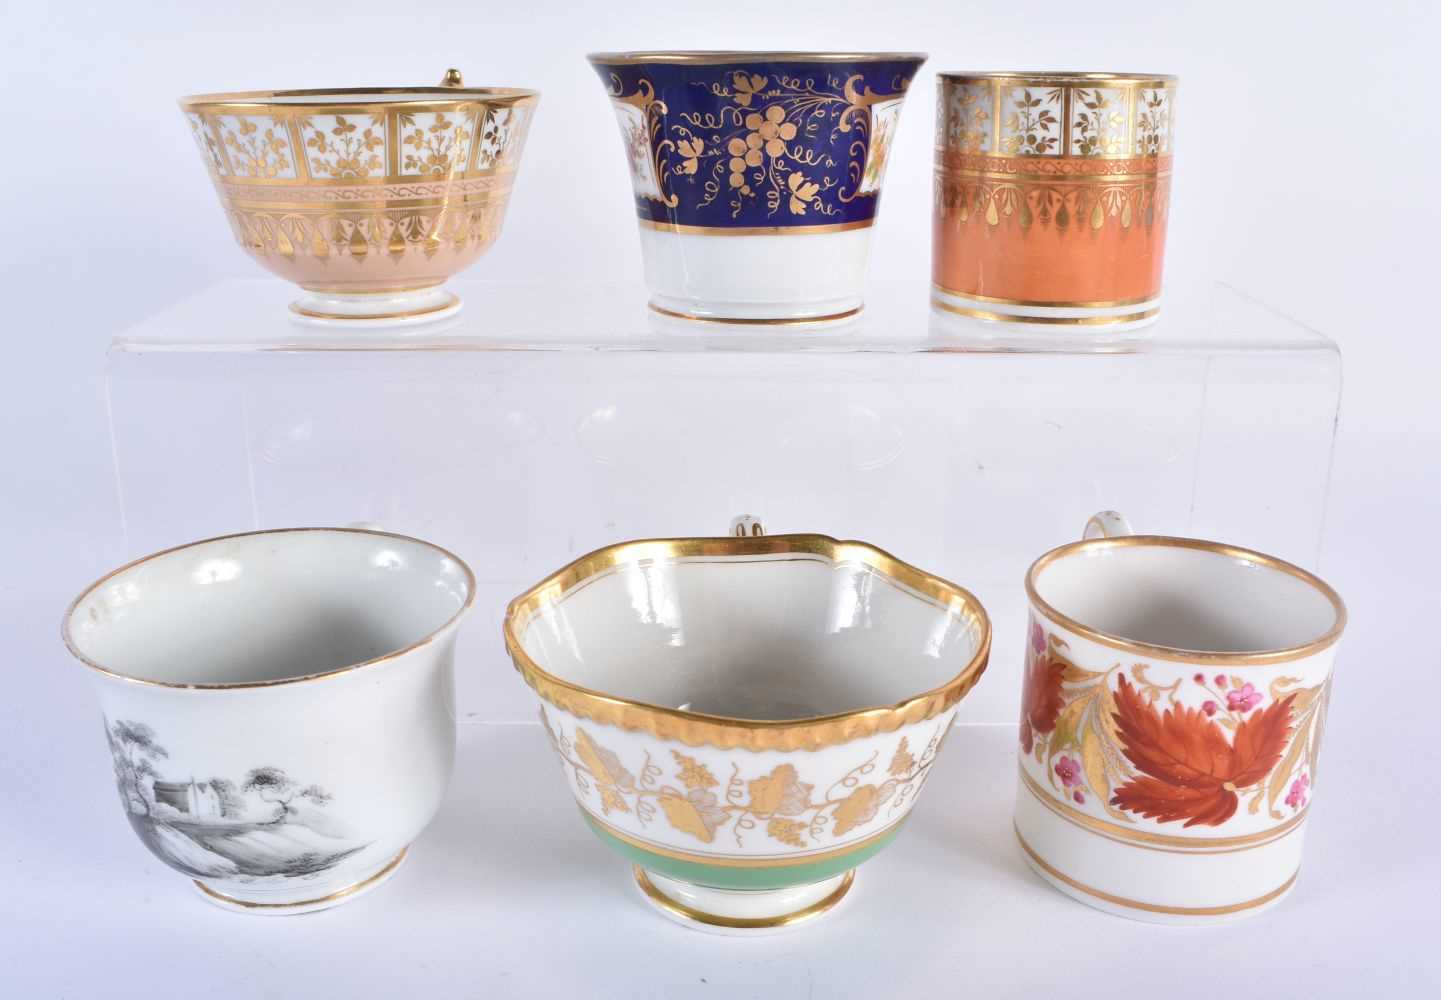 TWELVE LATE 18TH/19TH CENTURY ENGLISH PORCELAIN CUPS including Chmaberlains & Graingers Worcester. - Image 7 of 9